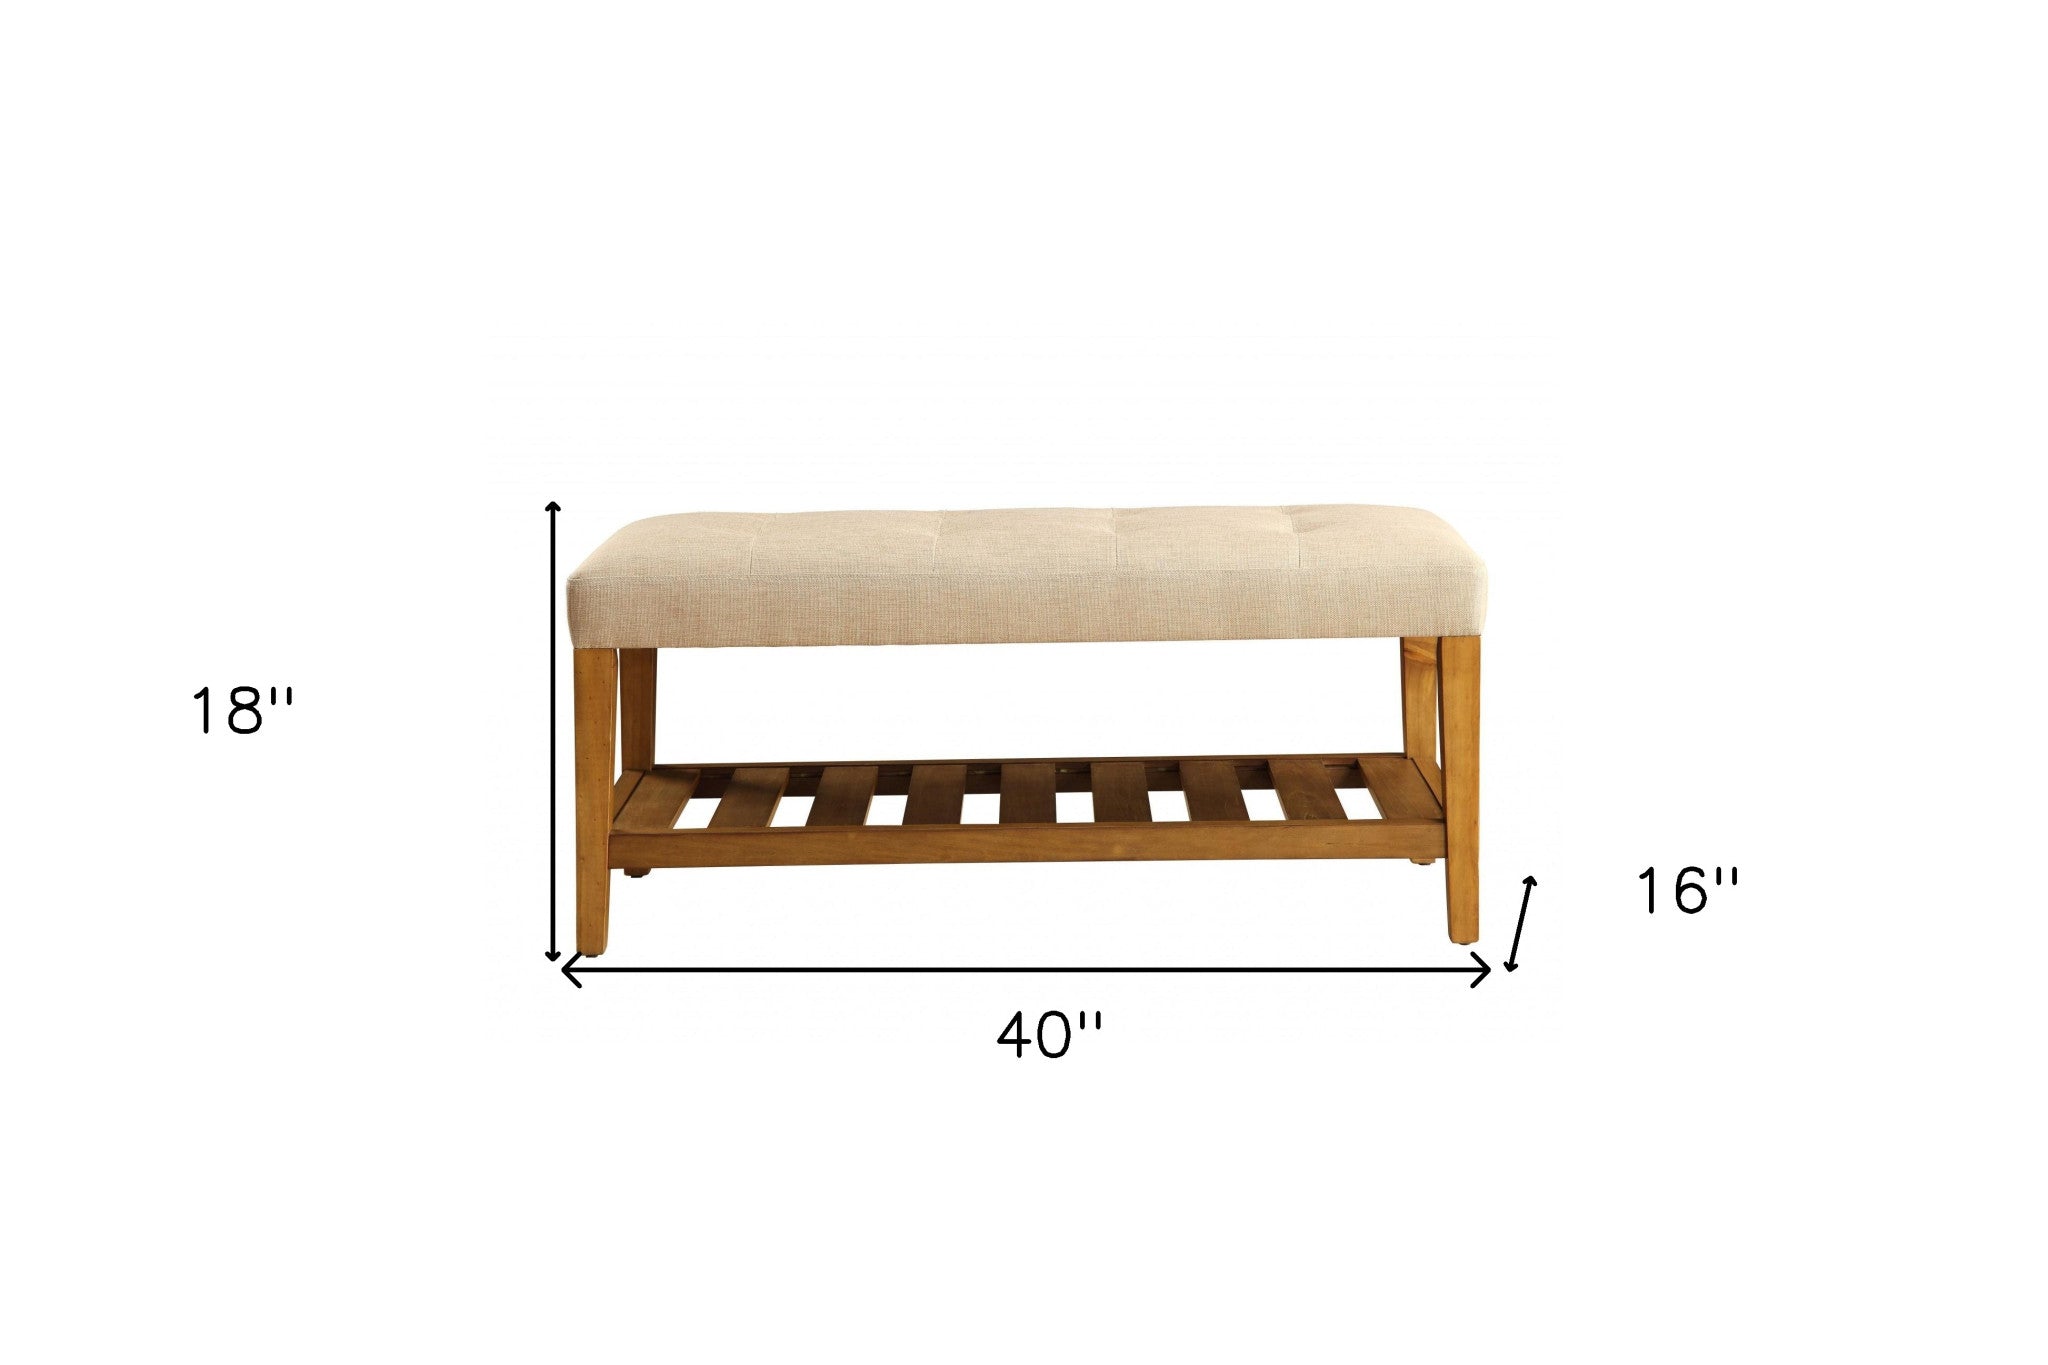 40" Light Gray and Brown Upholstered Polyester Bench with Shelves